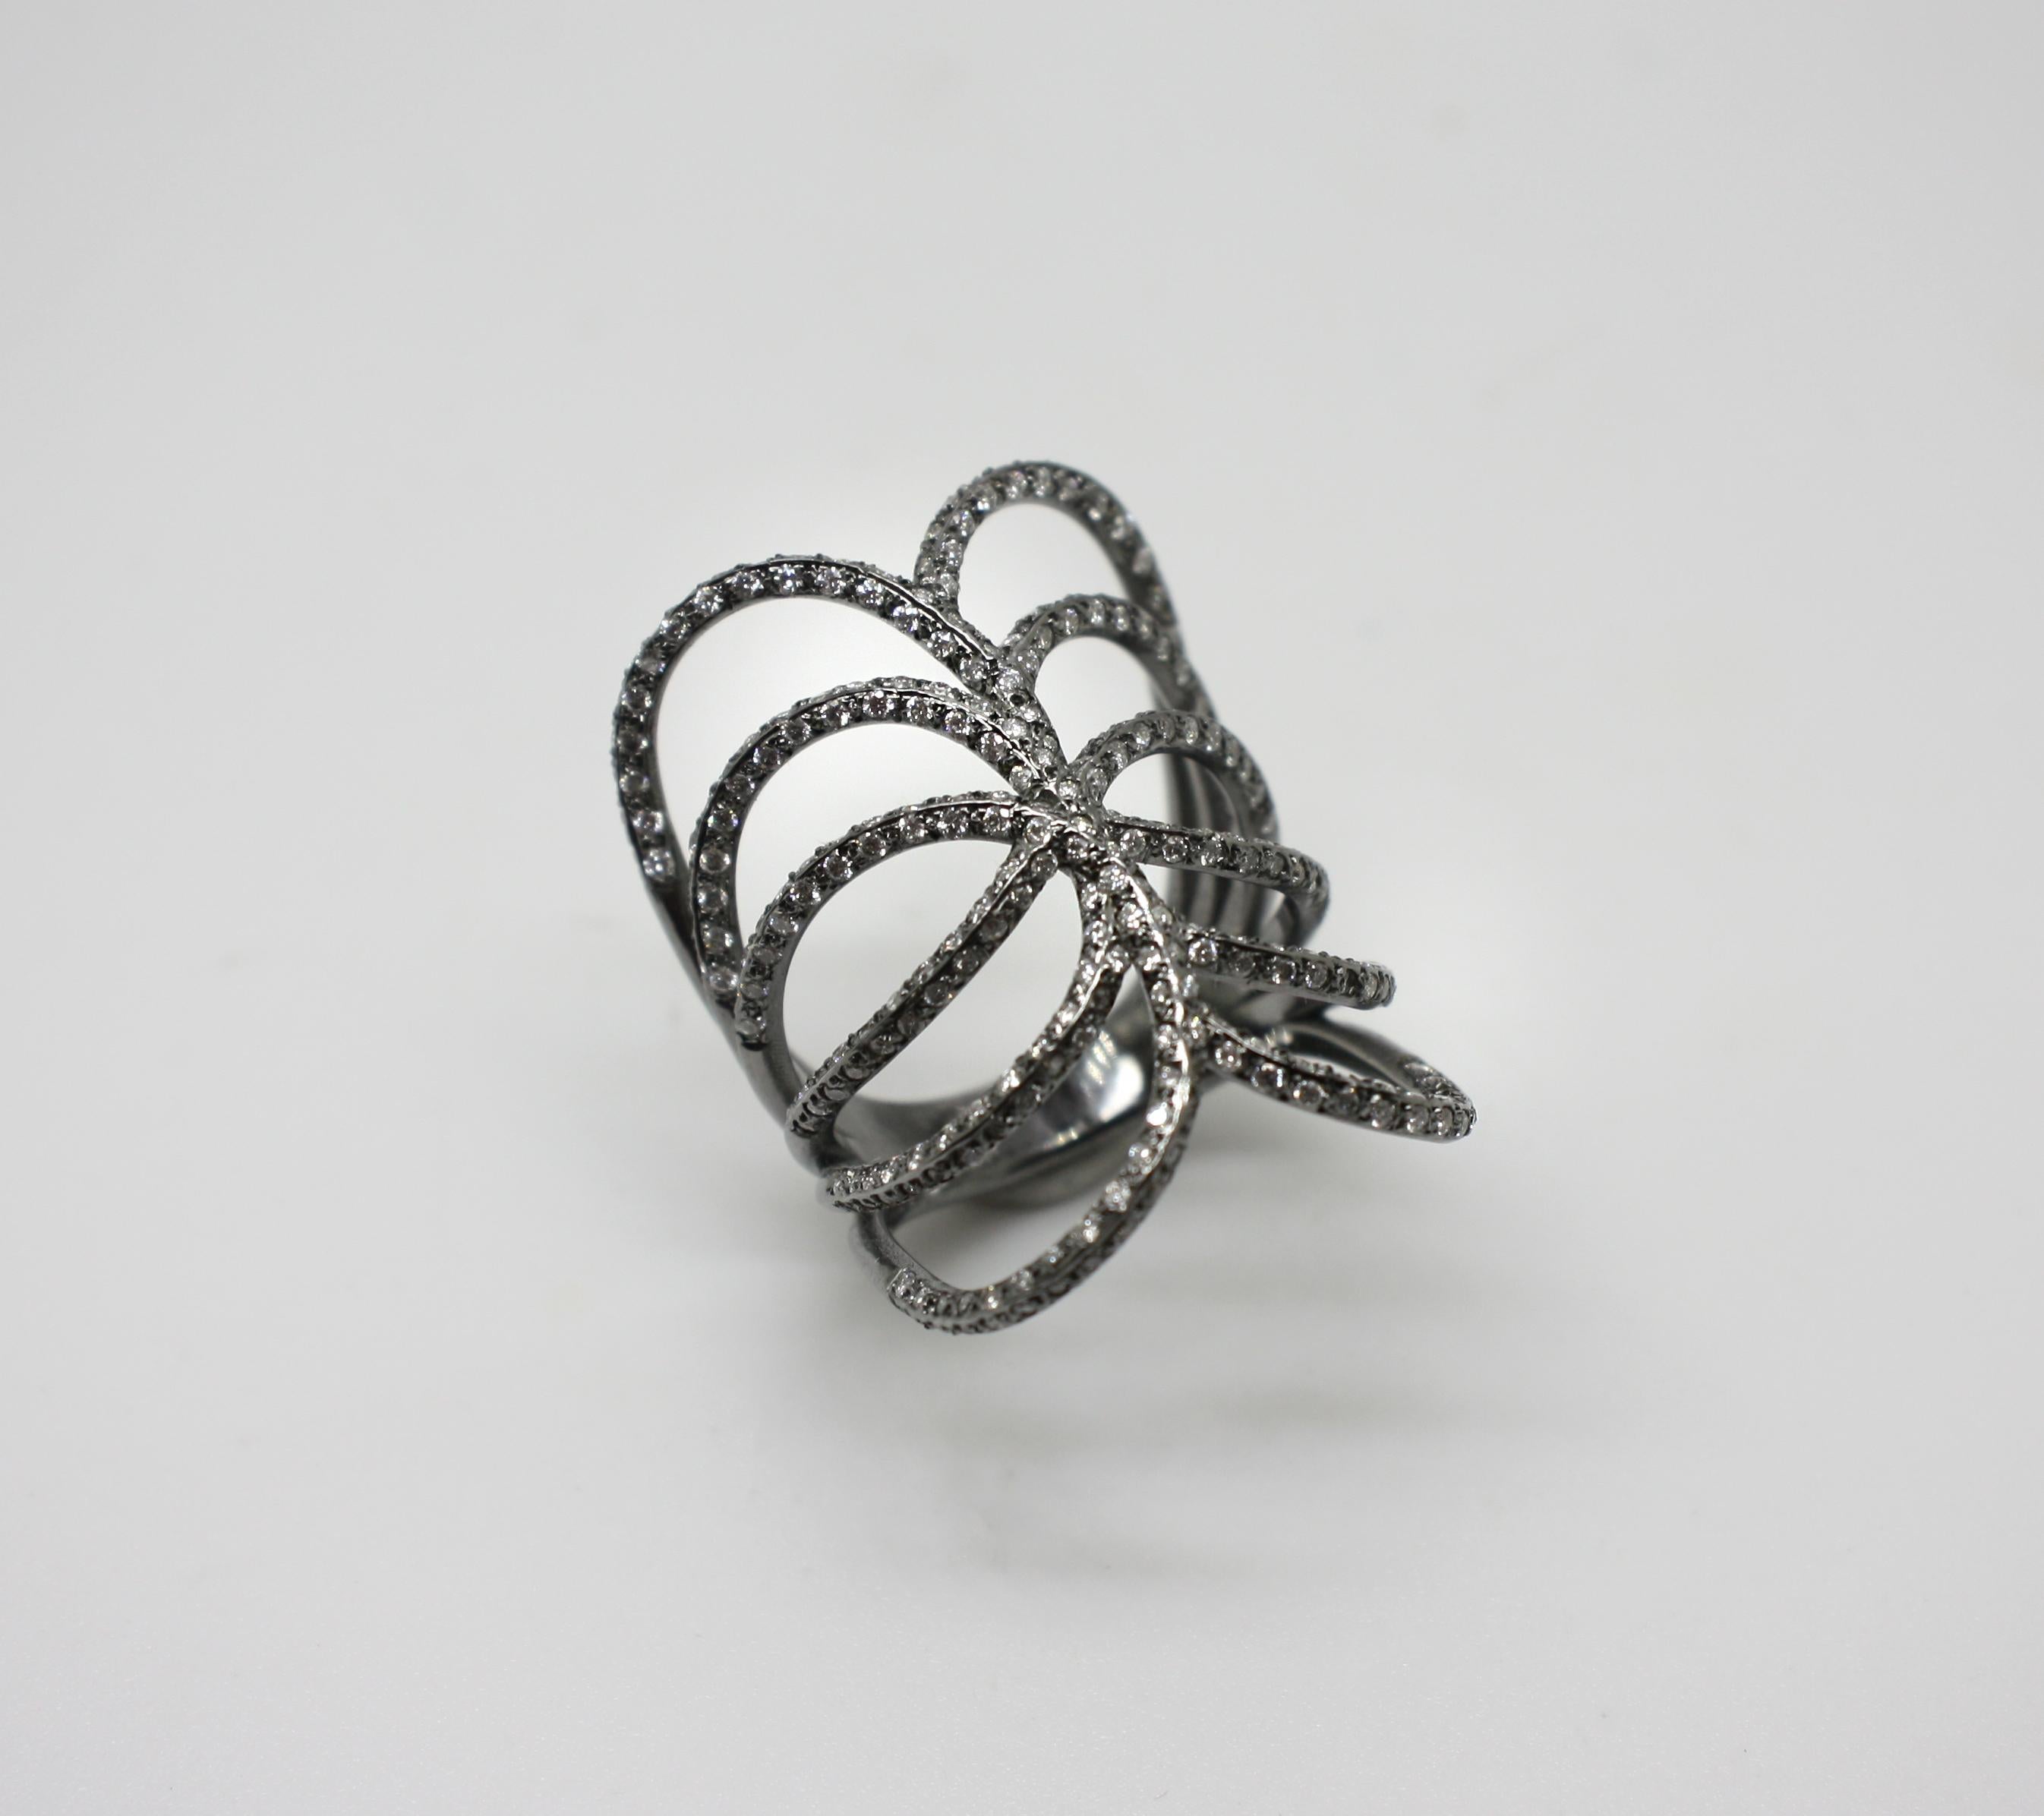 S.Georgios designer 18 Karat White Gold Black Rhodium Diamond Ring is all handmade in a unique design. The gorgeous ring features brilliant cut white diamonds total weight of 1.36 Carat is made of a wide spiral design. 
We also make this beautiful